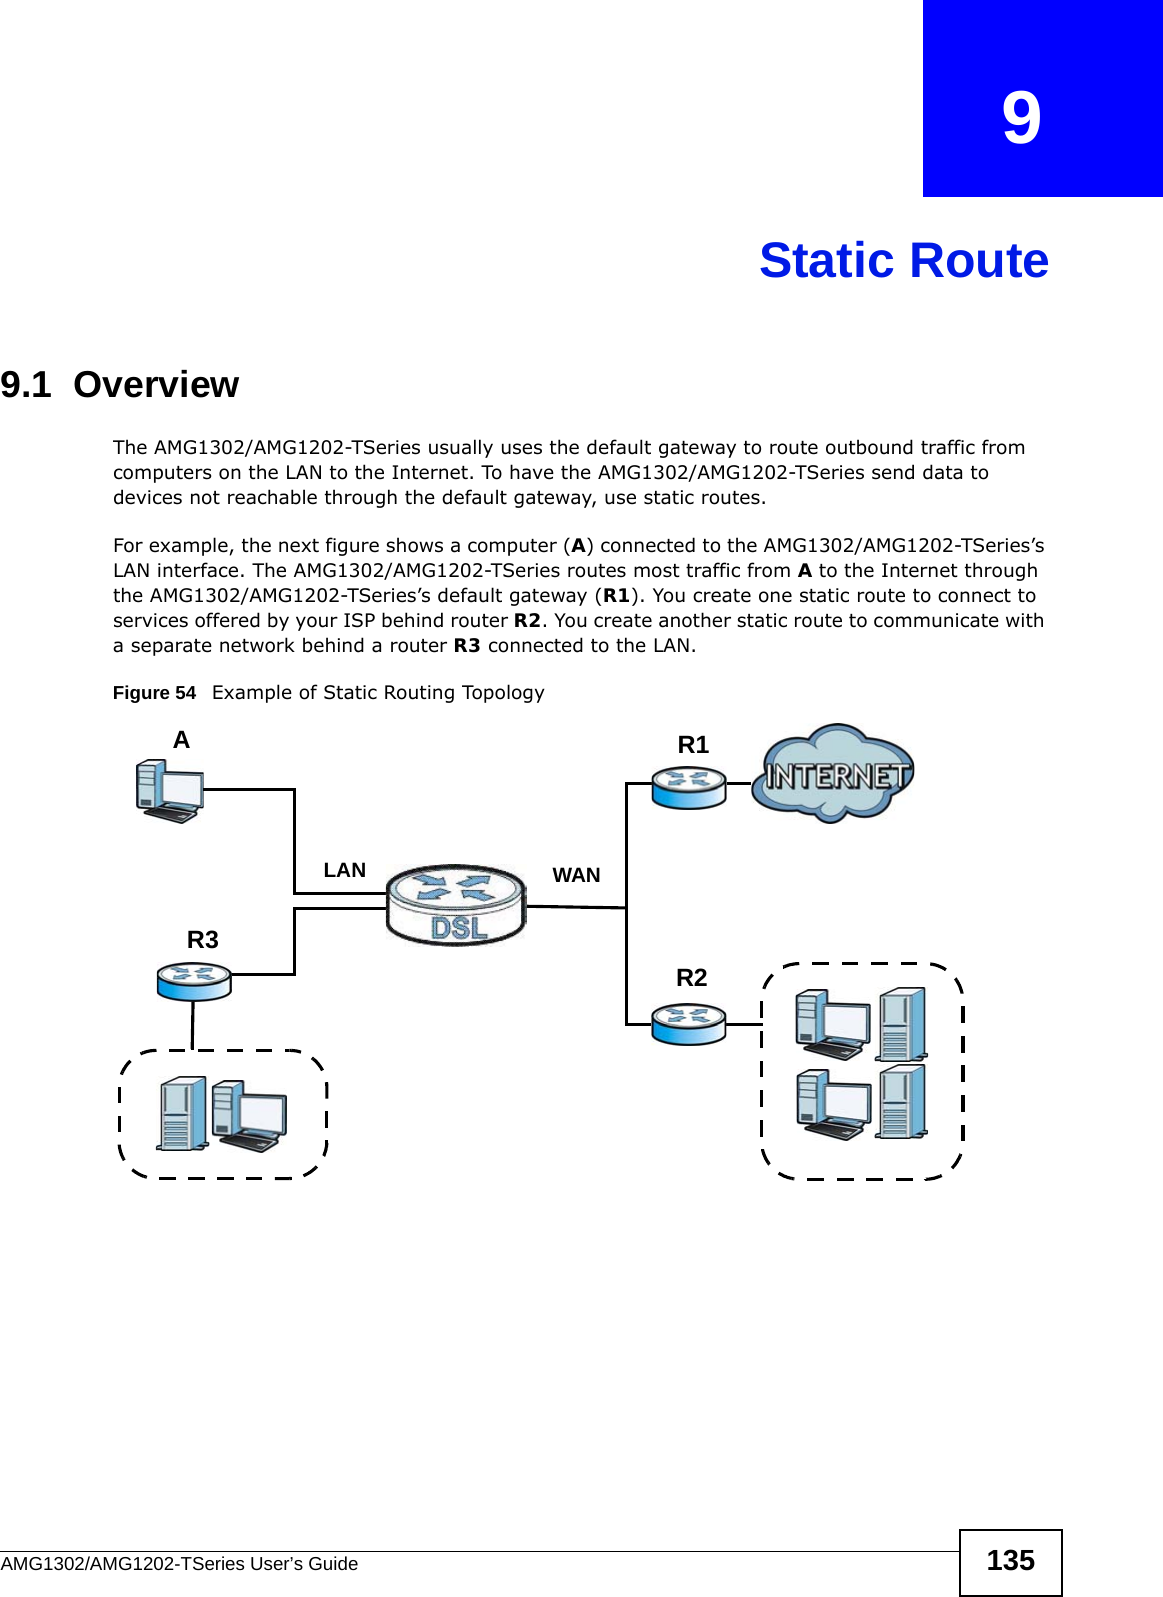 AMG1302/AMG1202-TSeries User’s Guide 135CHAPTER   9Static Route9.1  Overview The AMG1302/AMG1202-TSeries usually uses the default gateway to route outbound traffic from computers on the LAN to the Internet. To have the AMG1302/AMG1202-TSeries send data to devices not reachable through the default gateway, use static routes.For example, the next figure shows a computer (A) connected to the AMG1302/AMG1202-TSeries’s LAN interface. The AMG1302/AMG1202-TSeries routes most traffic from A to the Internet through the AMG1302/AMG1202-TSeries’s default gateway (R1). You create one static route to connect to services offered by your ISP behind router R2. You create another static route to communicate with a separate network behind a router R3 connected to the LAN.   Figure 54   Example of Static Routing TopologyWANR1R2AR3LAN